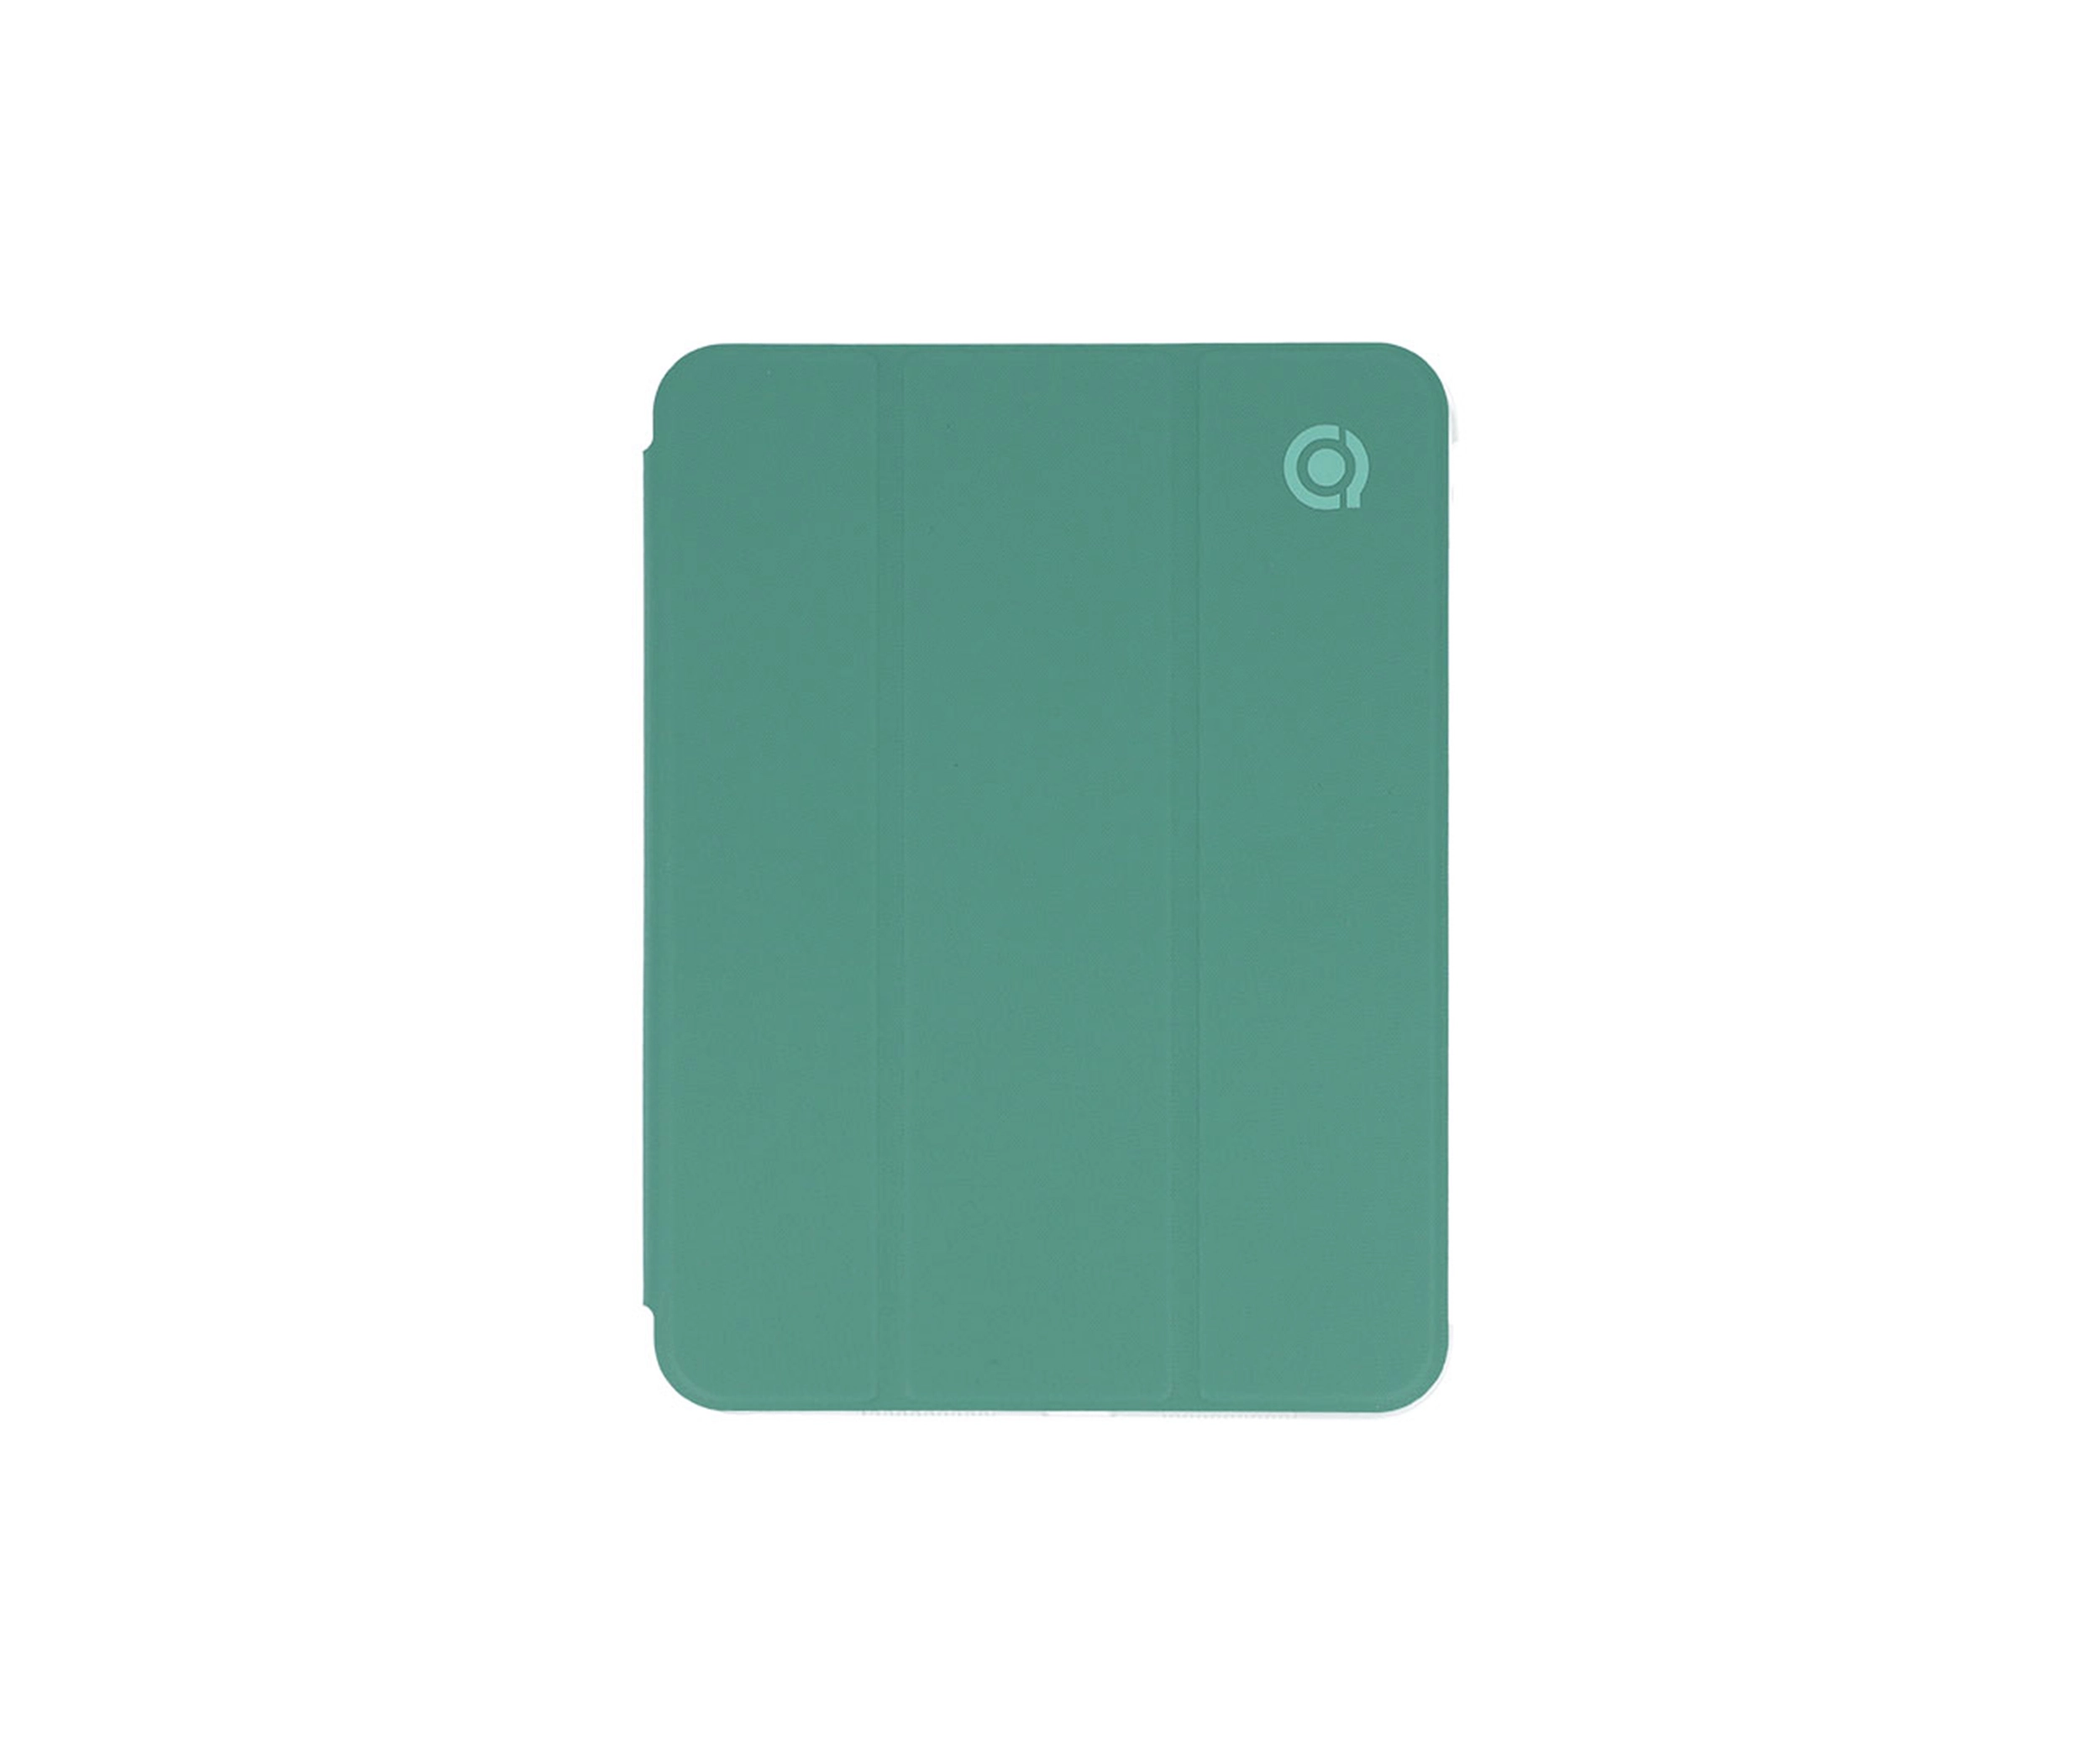 Light Green Frosted Silicon iPad Folio